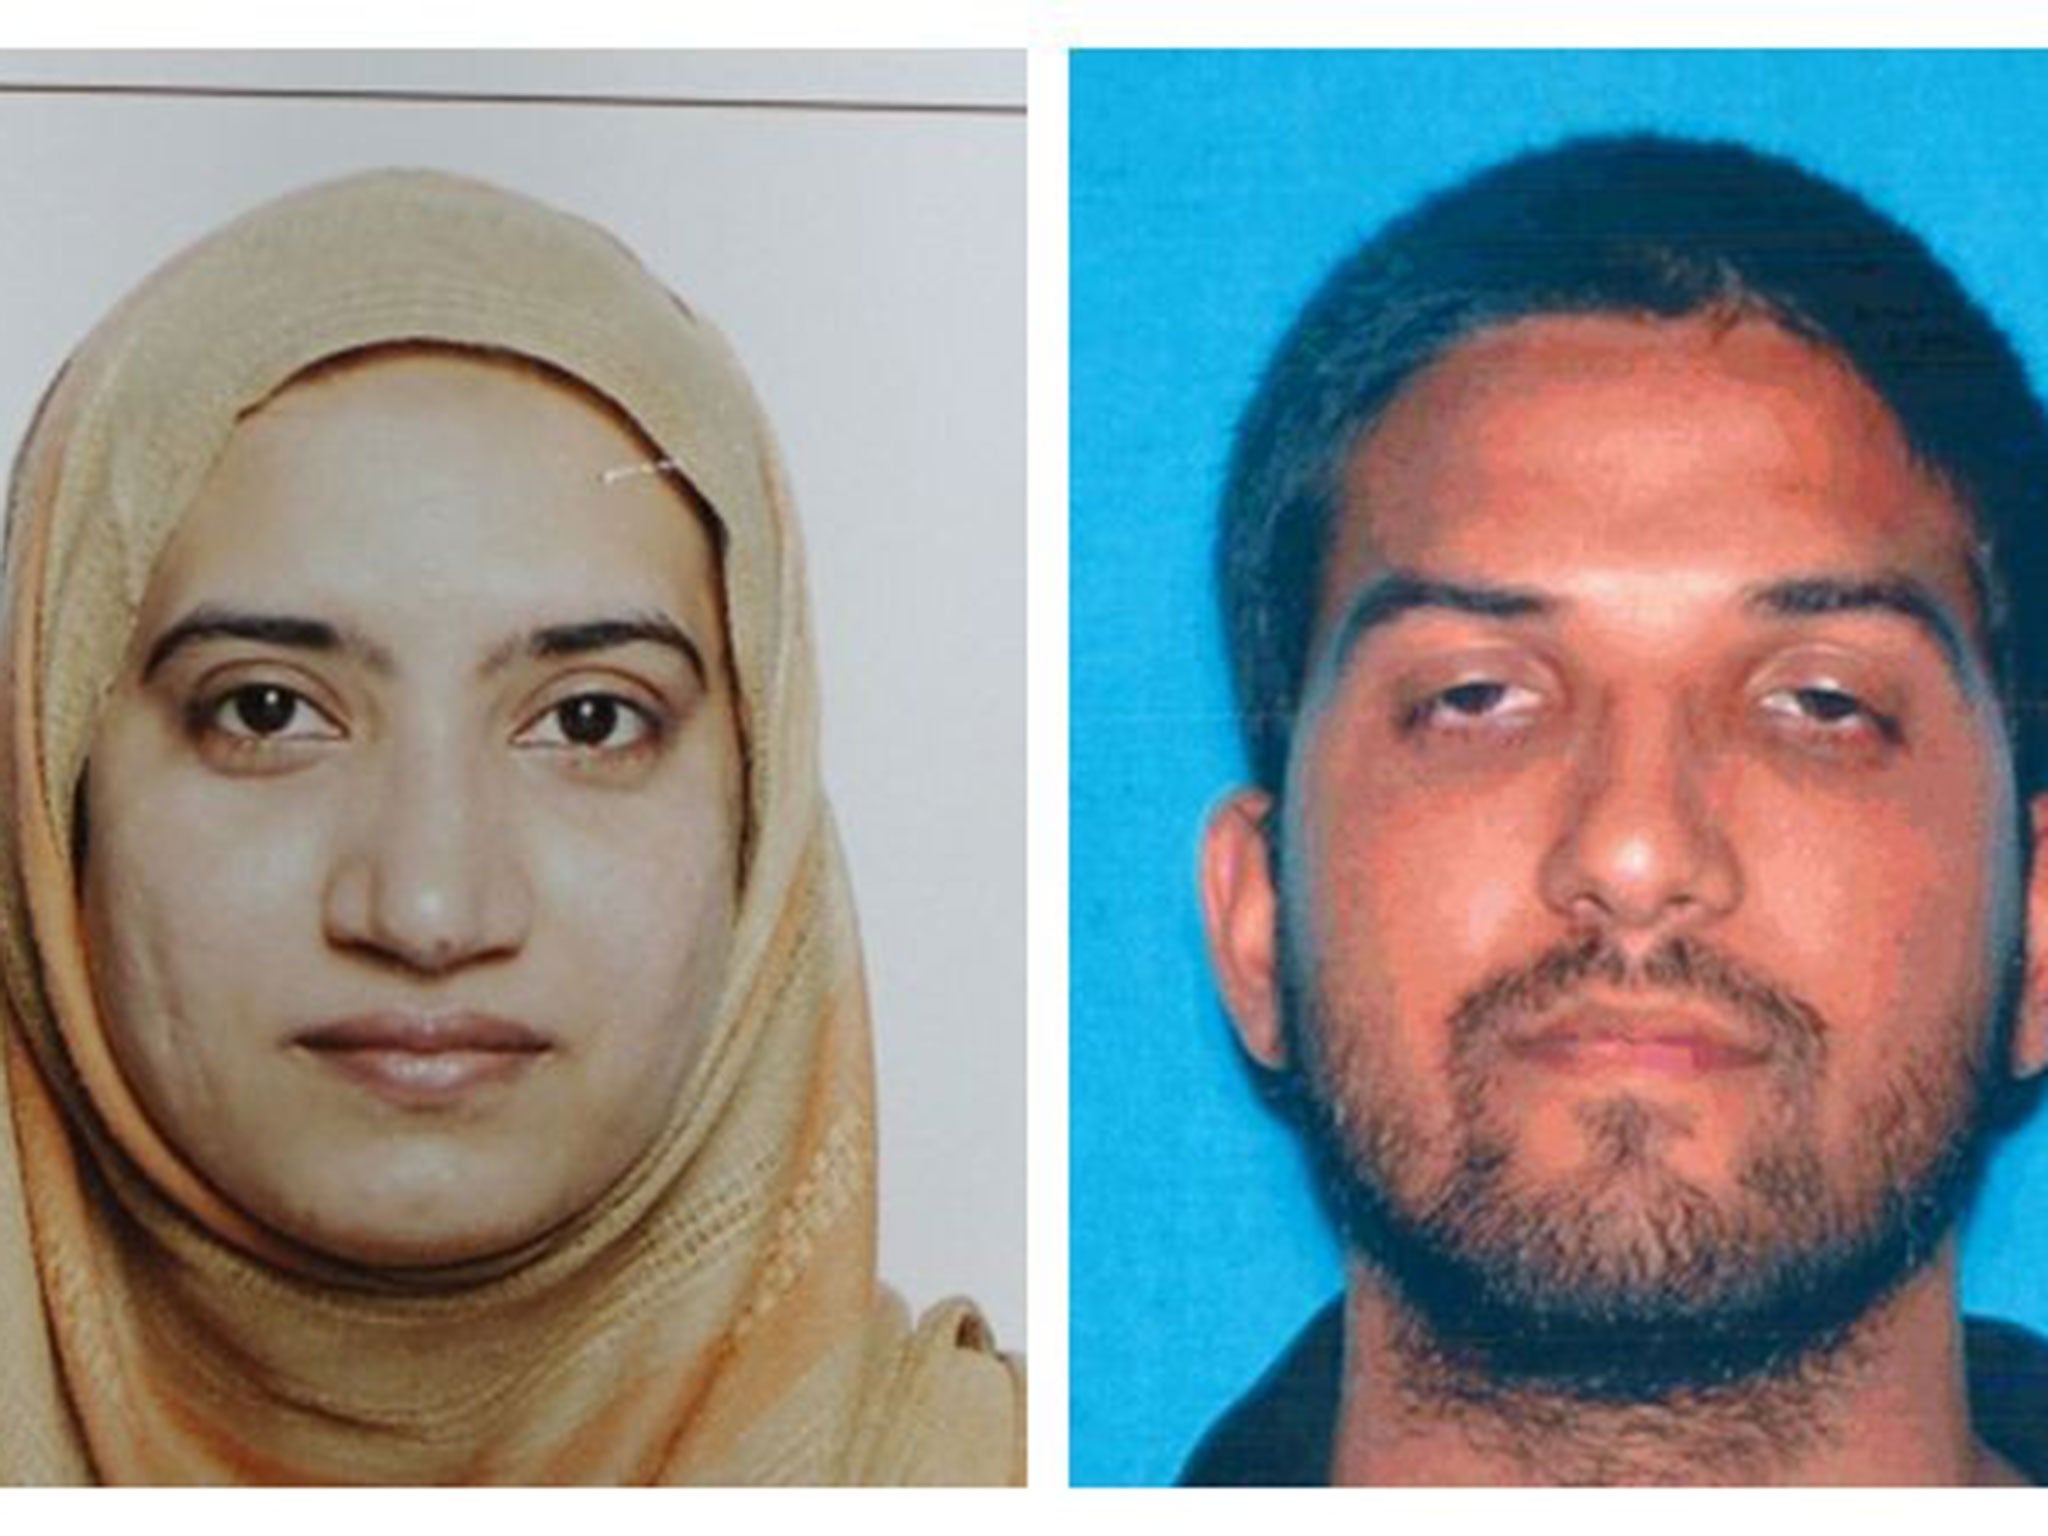 Tashfeen Malik, left, and Syed Farook died in a shoot-out with police